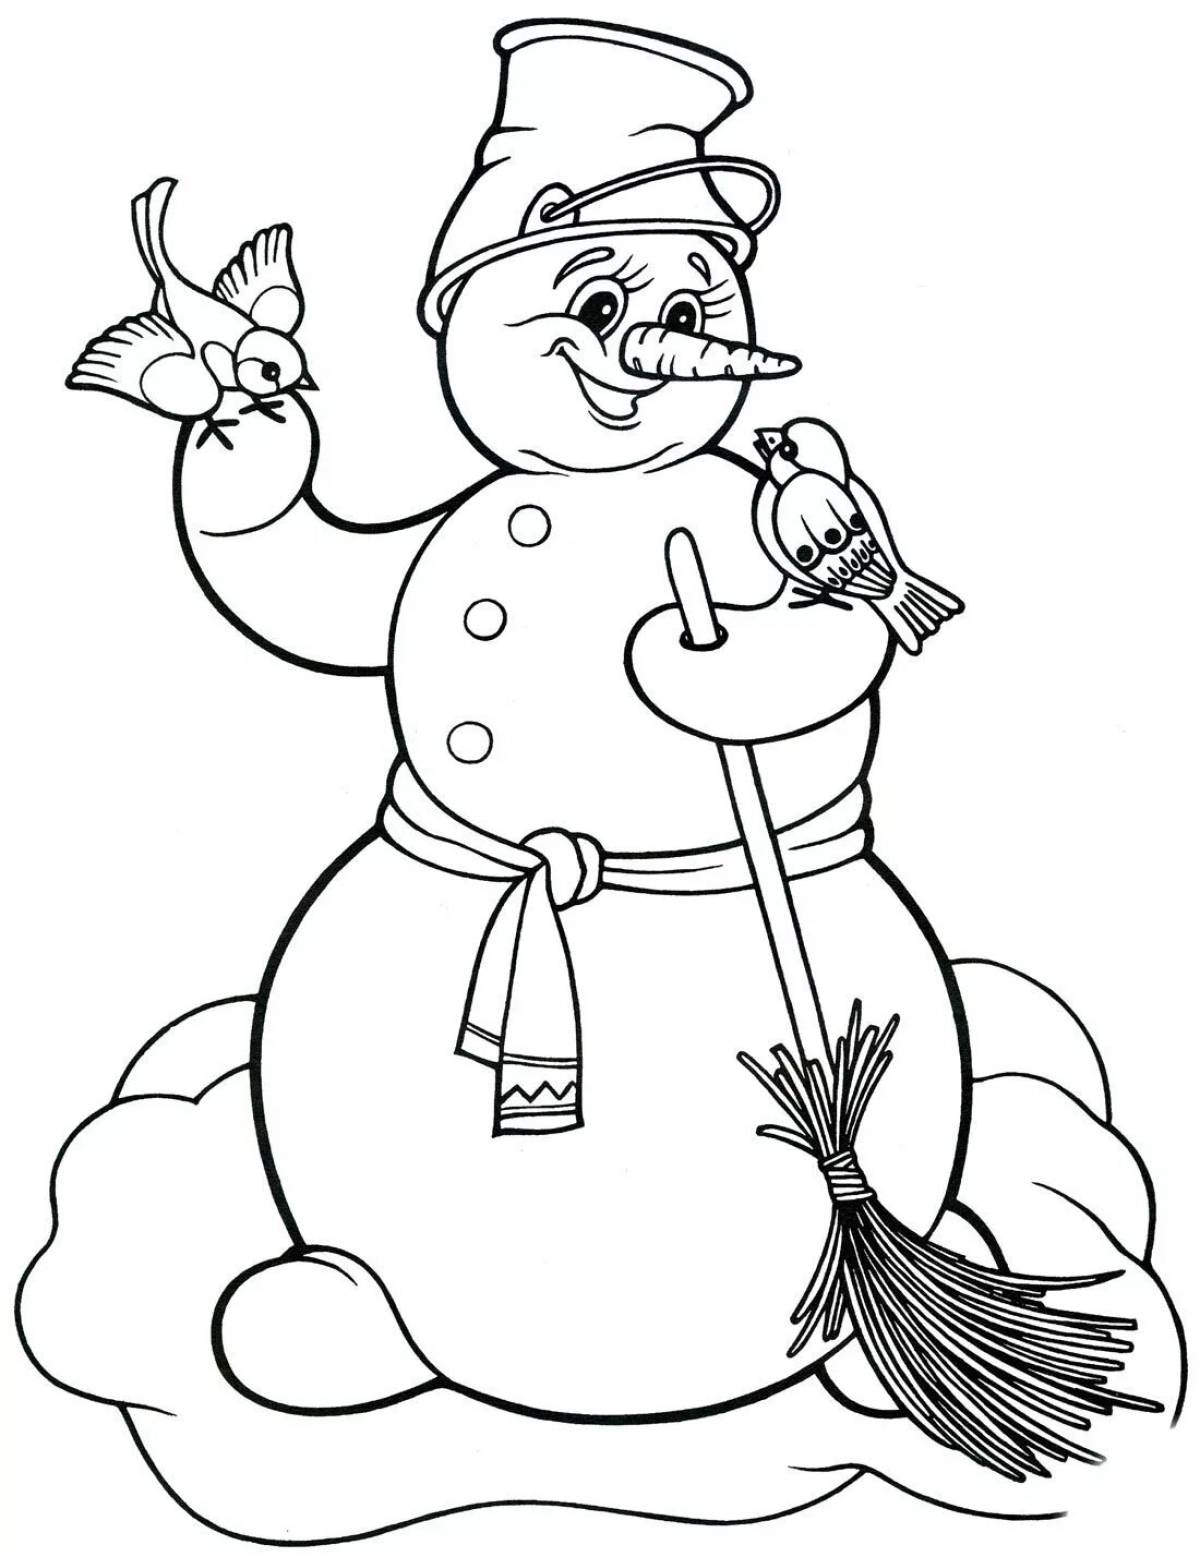 Snowman drawing for kids #4